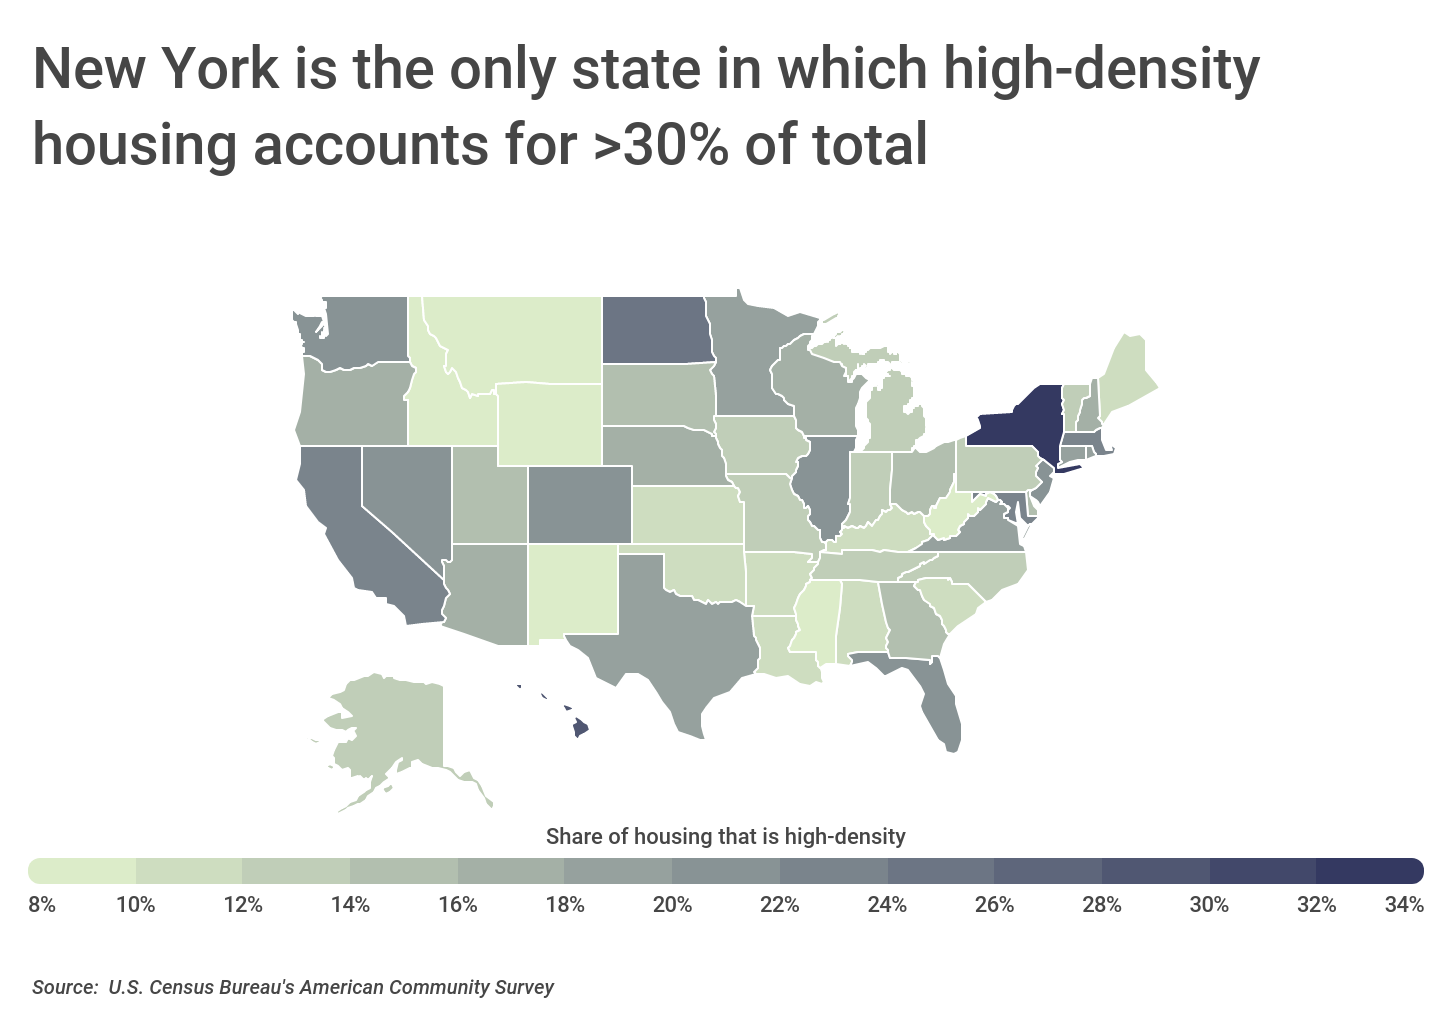 Chart3_NY is the only state where high-density housing is >30% of total